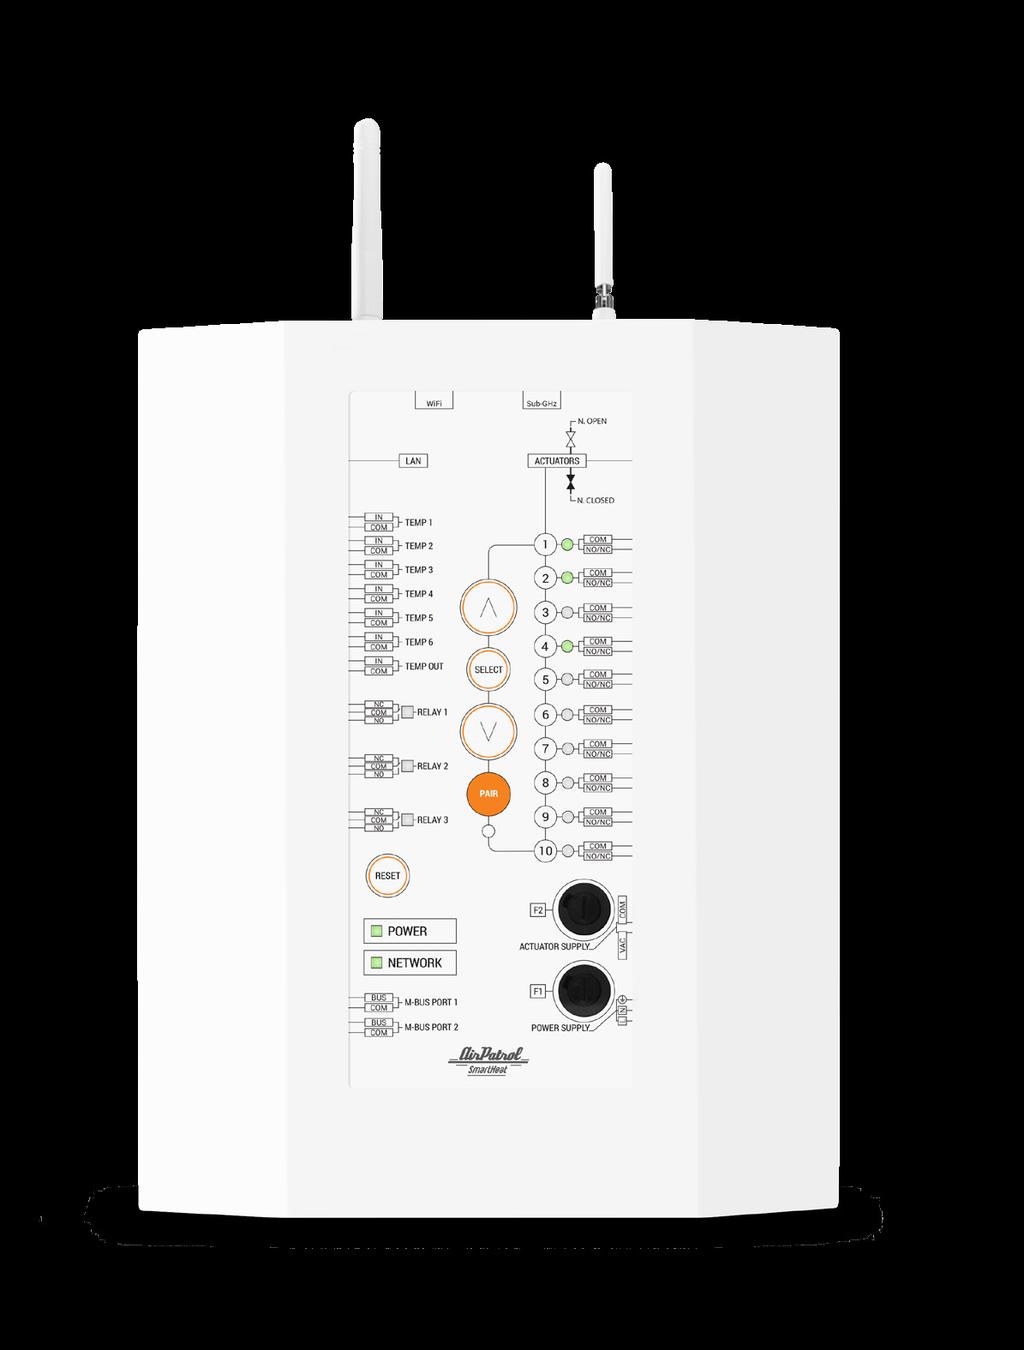 SMARTHEAT ALL-IN-ONE CONTROLUNIT Creates THE smartest heating system Wiring Center, Gateway, Relays, Temperature Sensors, M-Bus Connections ControlUnit is at the center of AirPatrol SmartHeat system.